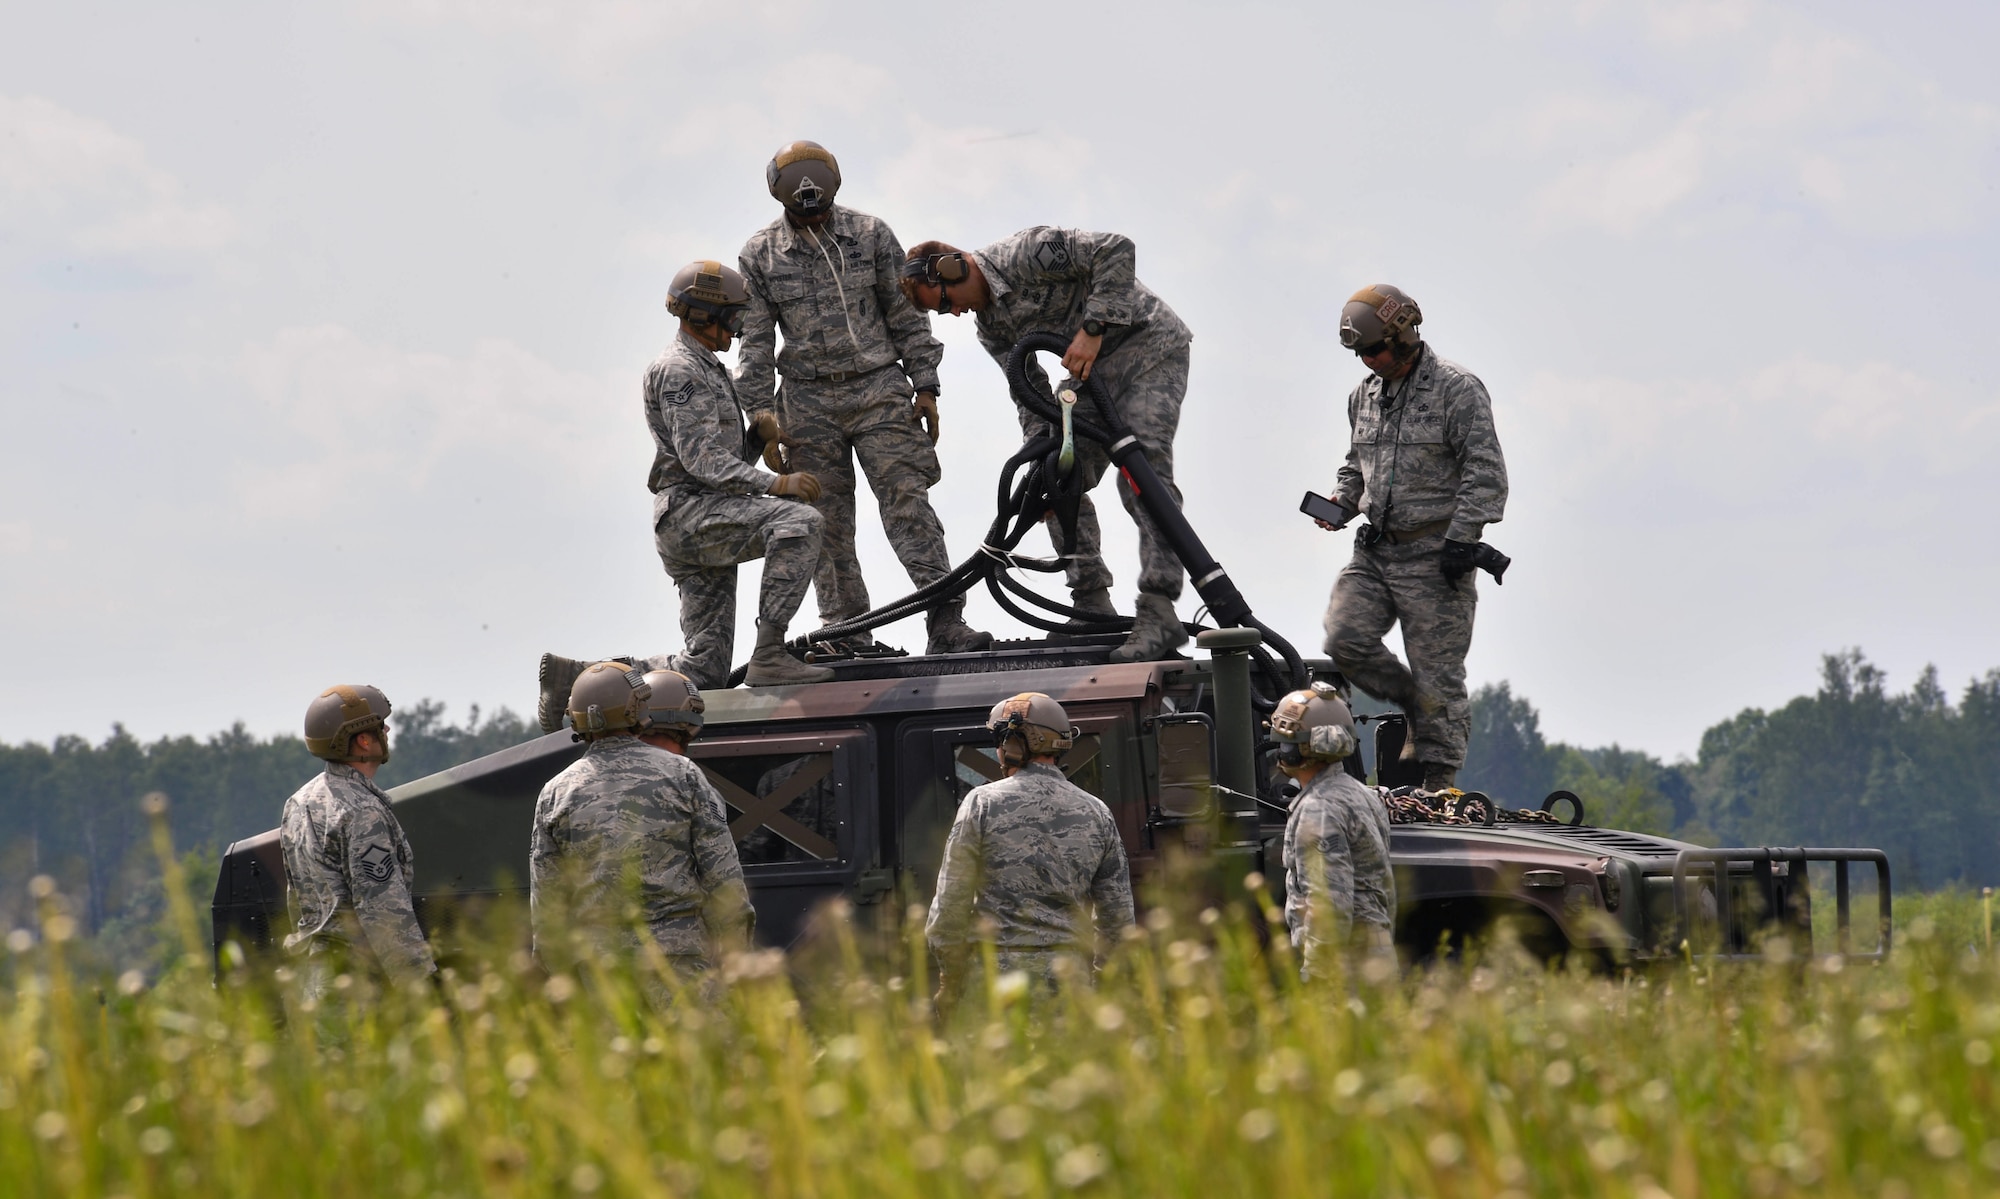 U.S. Air Force Airmen assigned to the 435th Contingency Response Group prepare a high mobility multipurpose wheeled vehicle to be picked up by a U.S. Army CH-47 Chinook for the 435th CRG’s sling load operation during exercise Saber Strike 17 at Lielvarde Air Base, Latvia, June 10, 2017. The 435th CRG Airmen practiced rigging the HUMVEE and a bundle multiple times to practice for a sling load operation. Saber Strike 17 continues to increase participating nations’ capacity to conduct a full spectrum of military operations. (U.S Air Force photo by Senior Airman Tryphena Mayhugh)